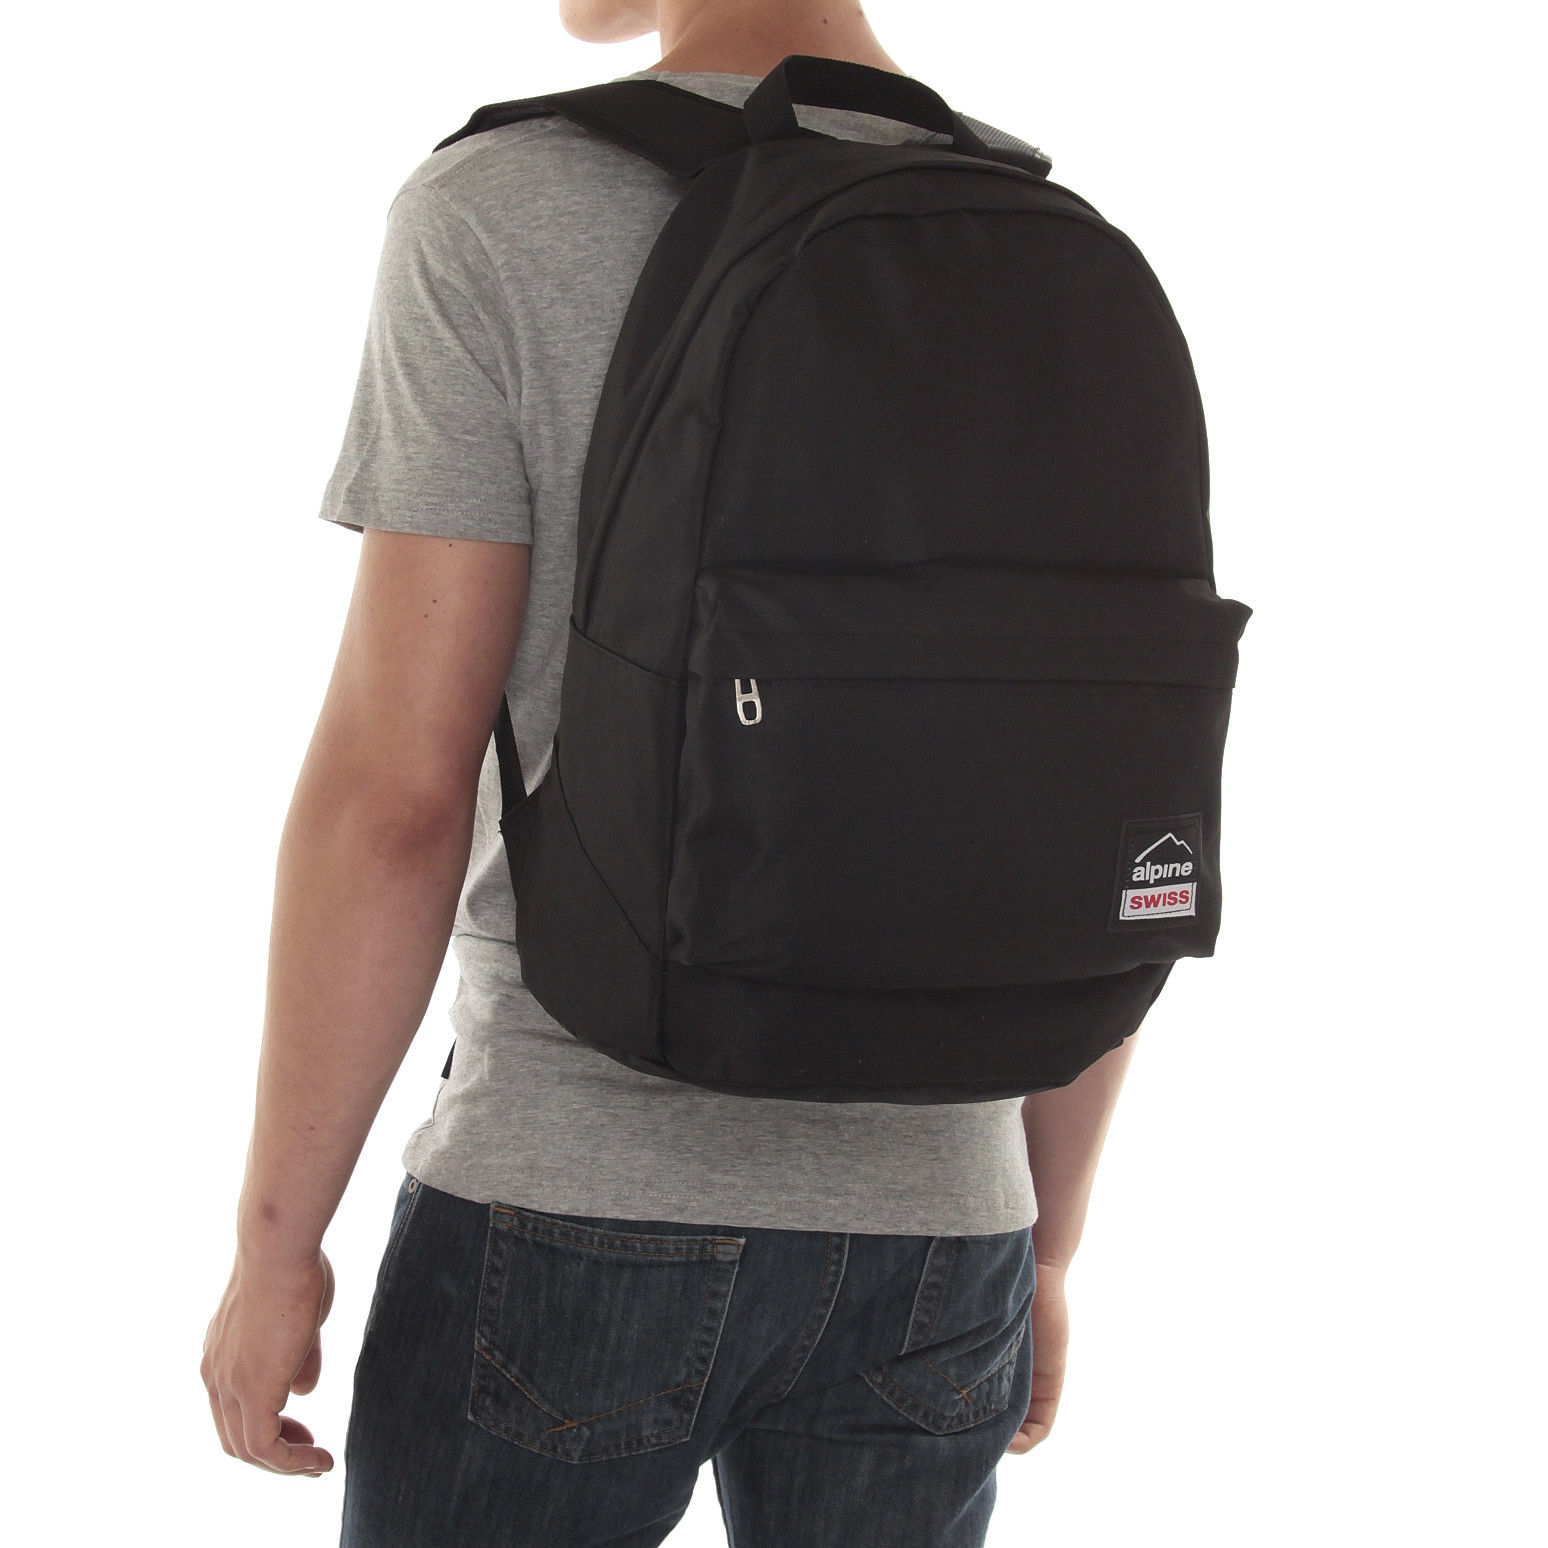 Alpine Swiss backpacks for $14, free shipping